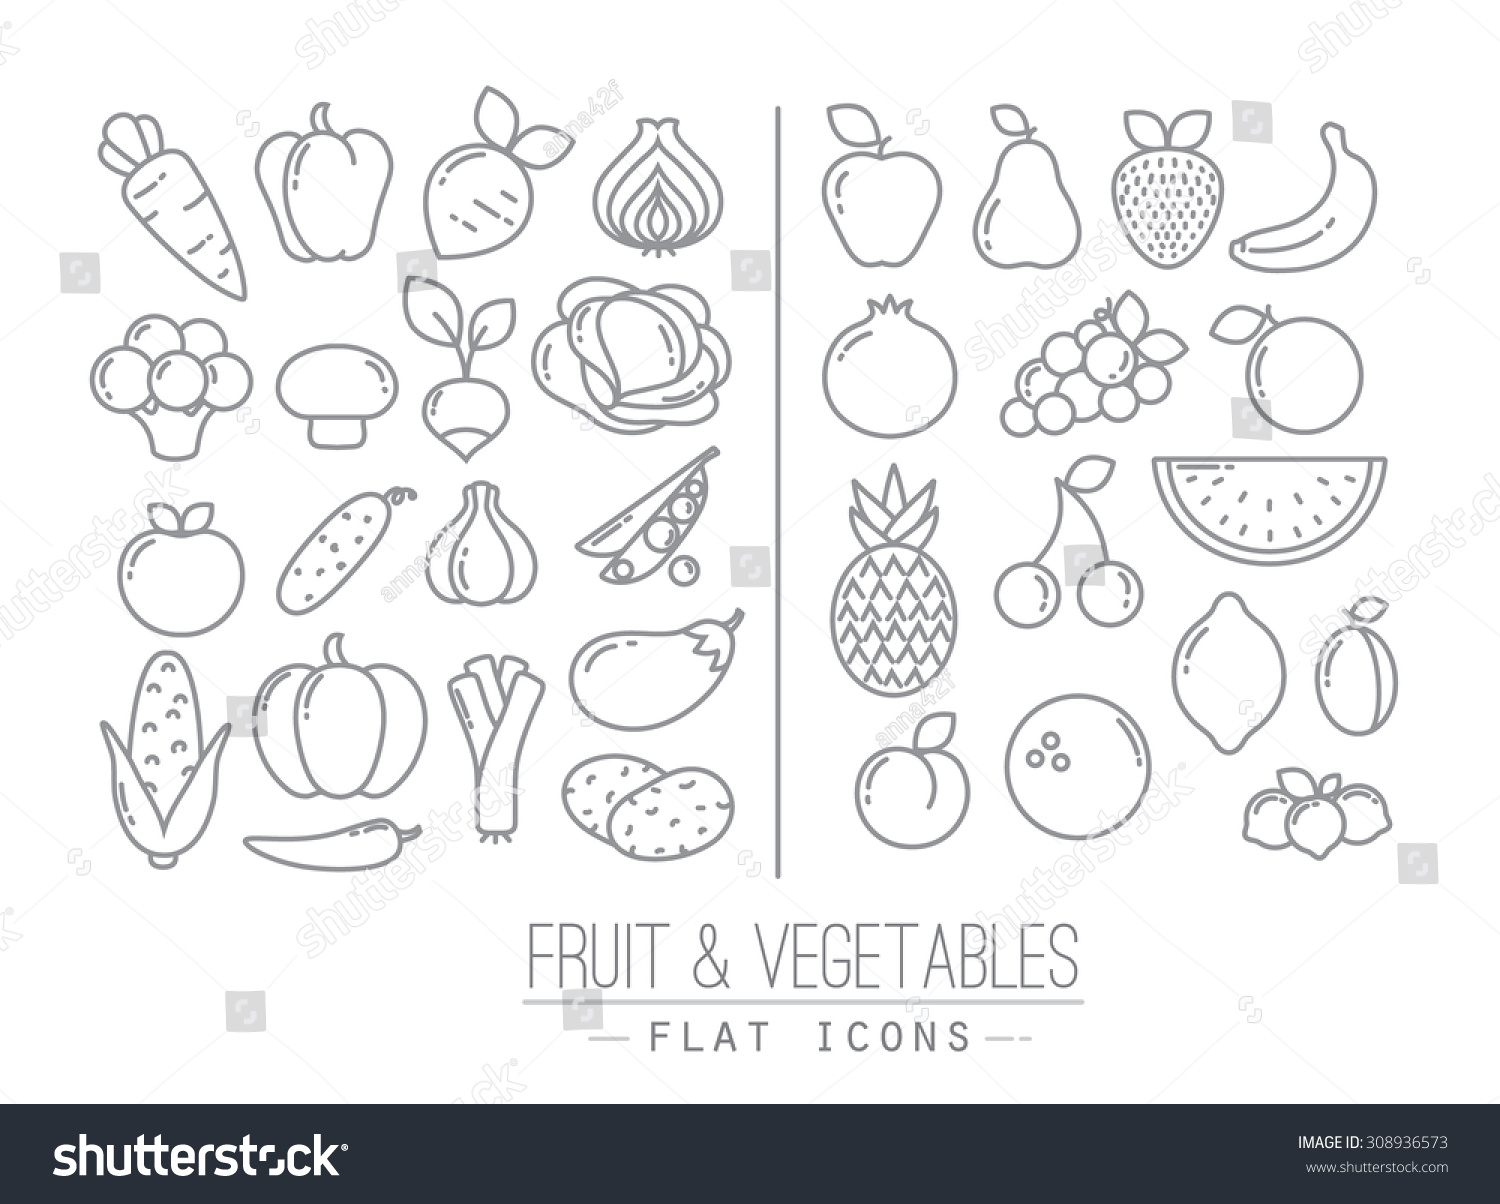 Set of flat fruits and vegetables icons drawing with black lines on white background #308936573